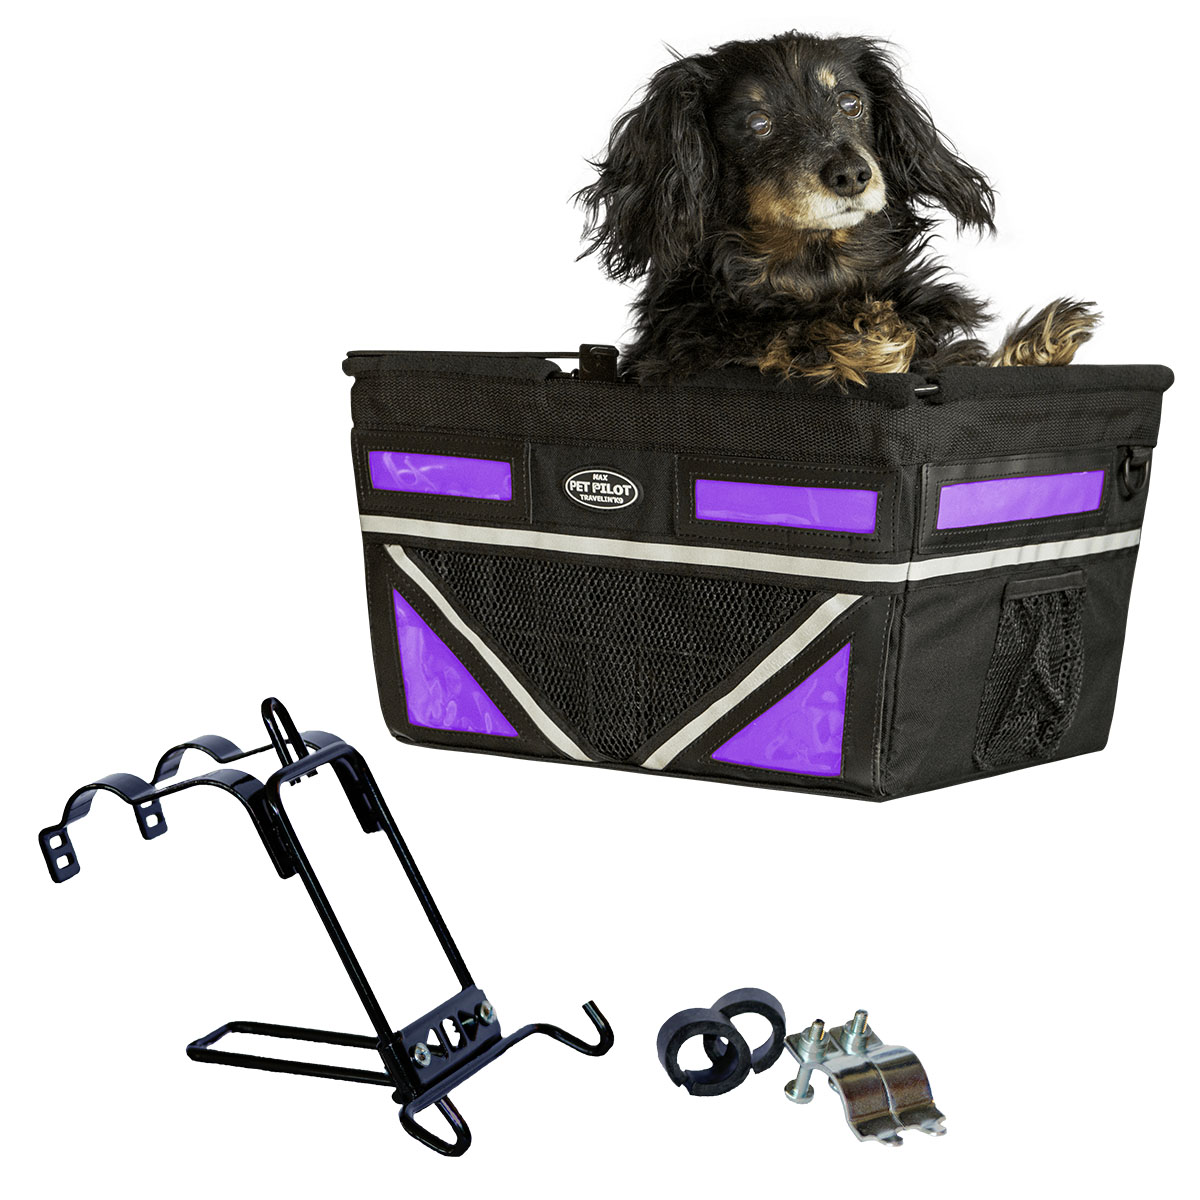 Ptx-8205 Max Dog Bicycle Basket Carrier, Purple Passion